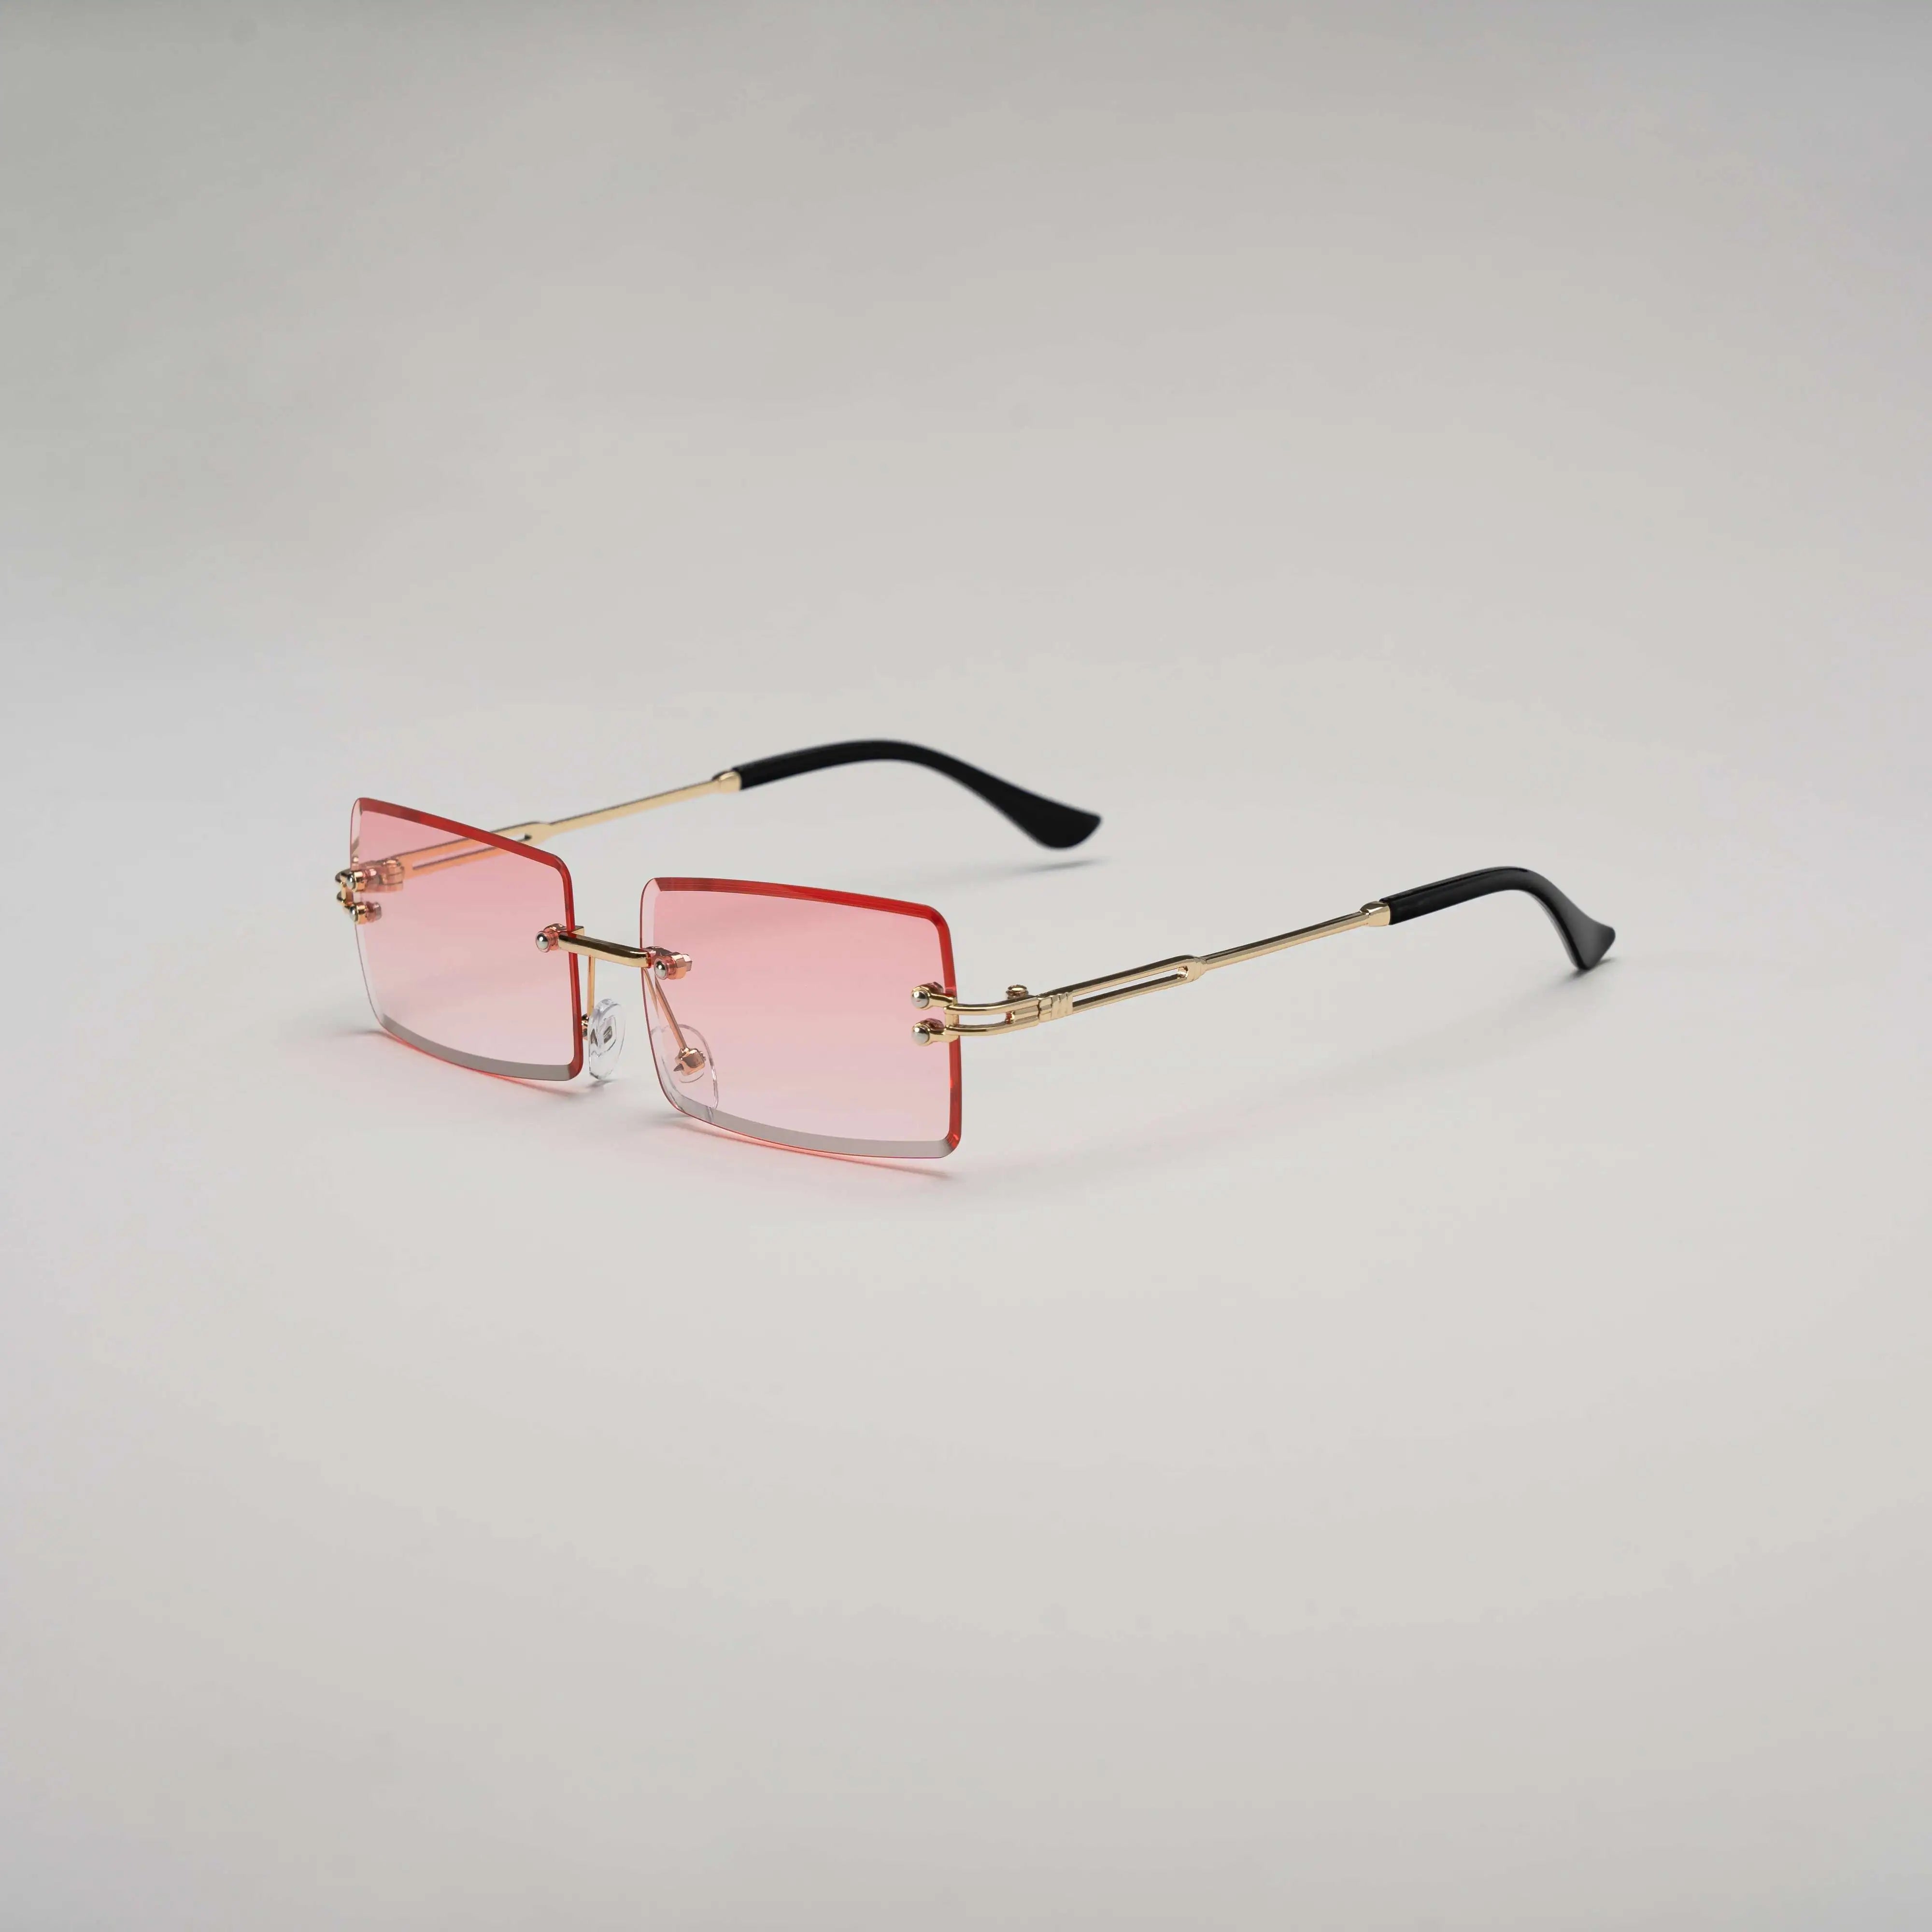 'The Afters' Rimless Sunglasses in Pink & Gold